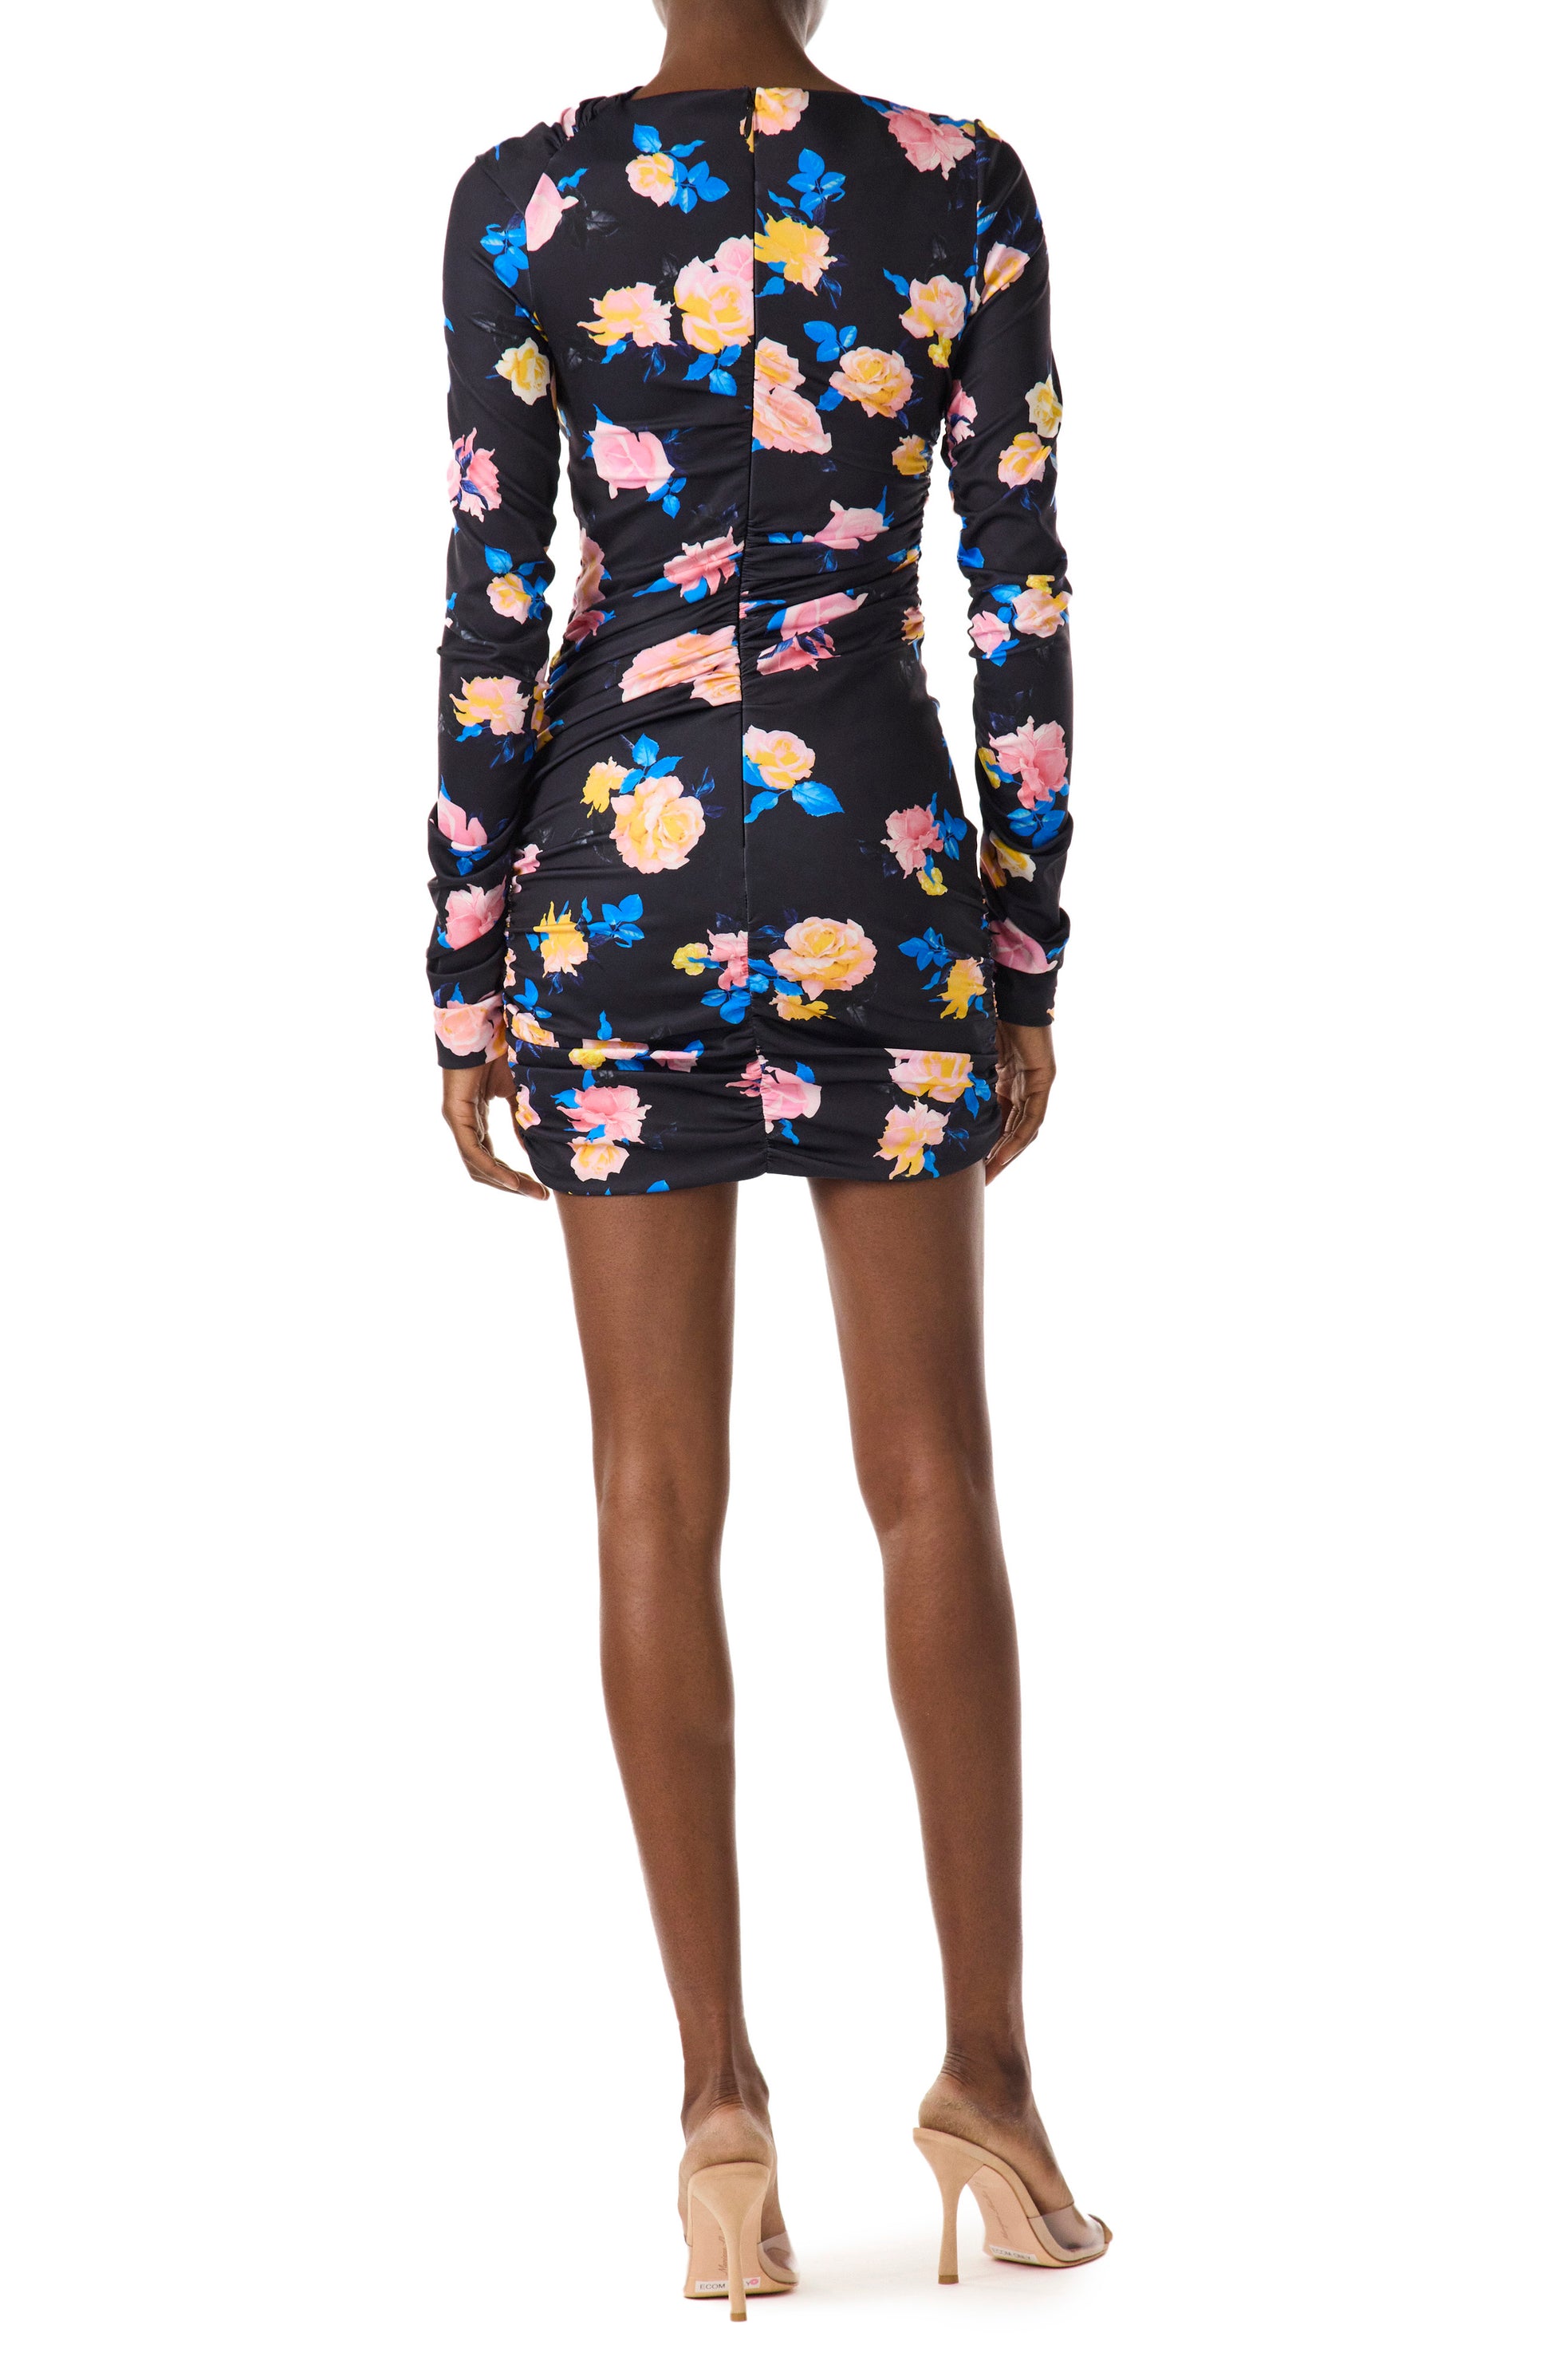 Monique Lhuillier floral printed long sleeve mini dress in navy multi colors.